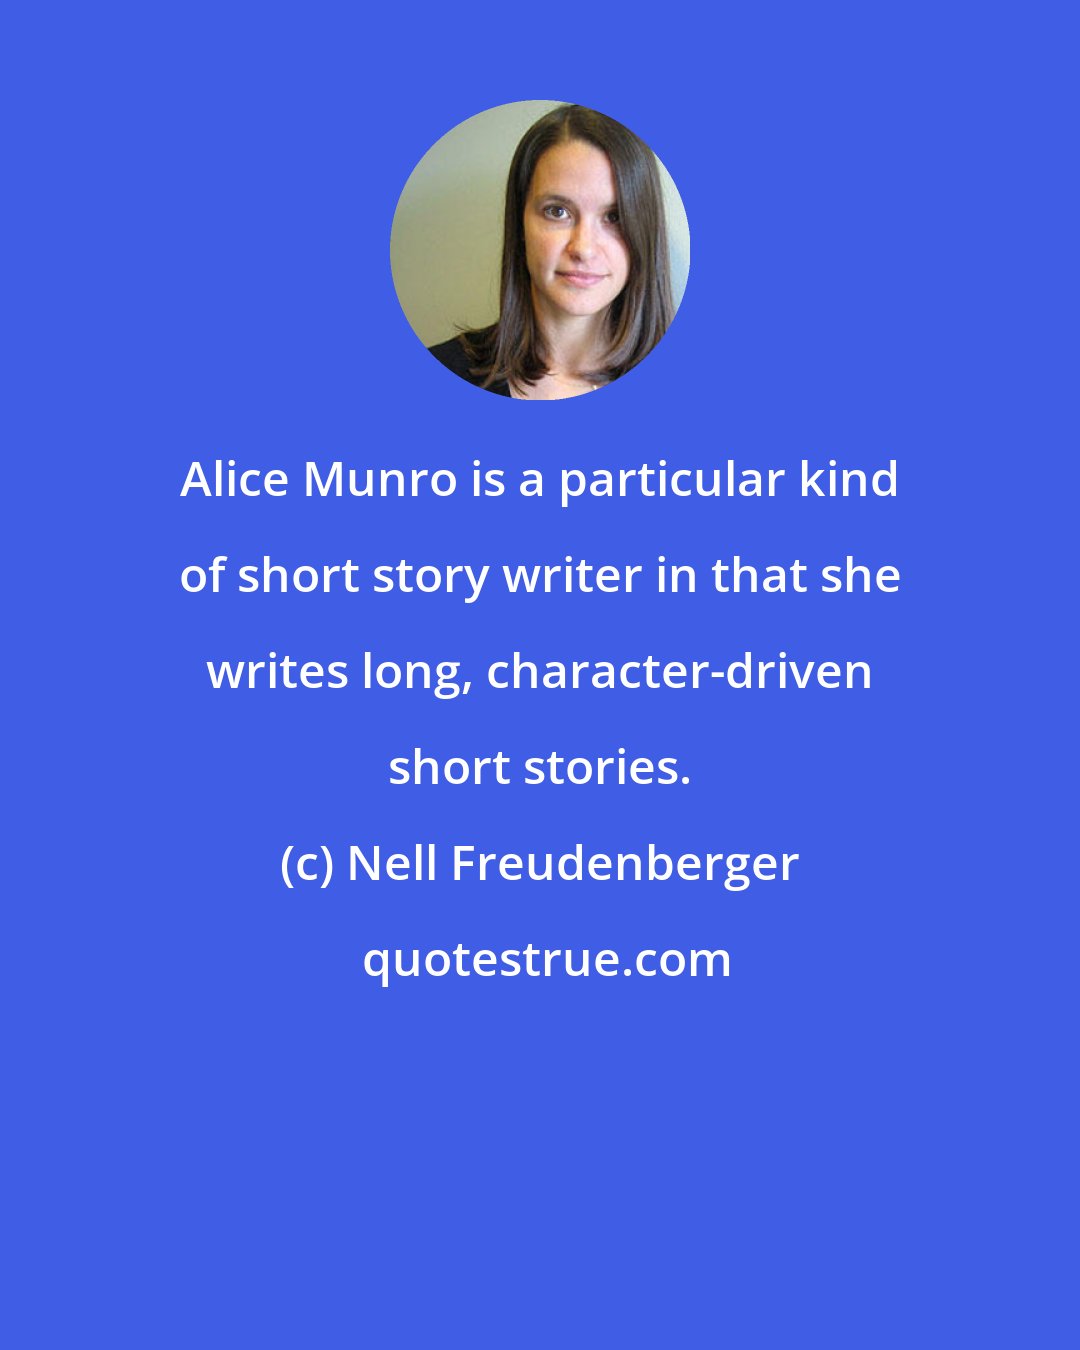 Nell Freudenberger: Alice Munro is a particular kind of short story writer in that she writes long, character-driven short stories.